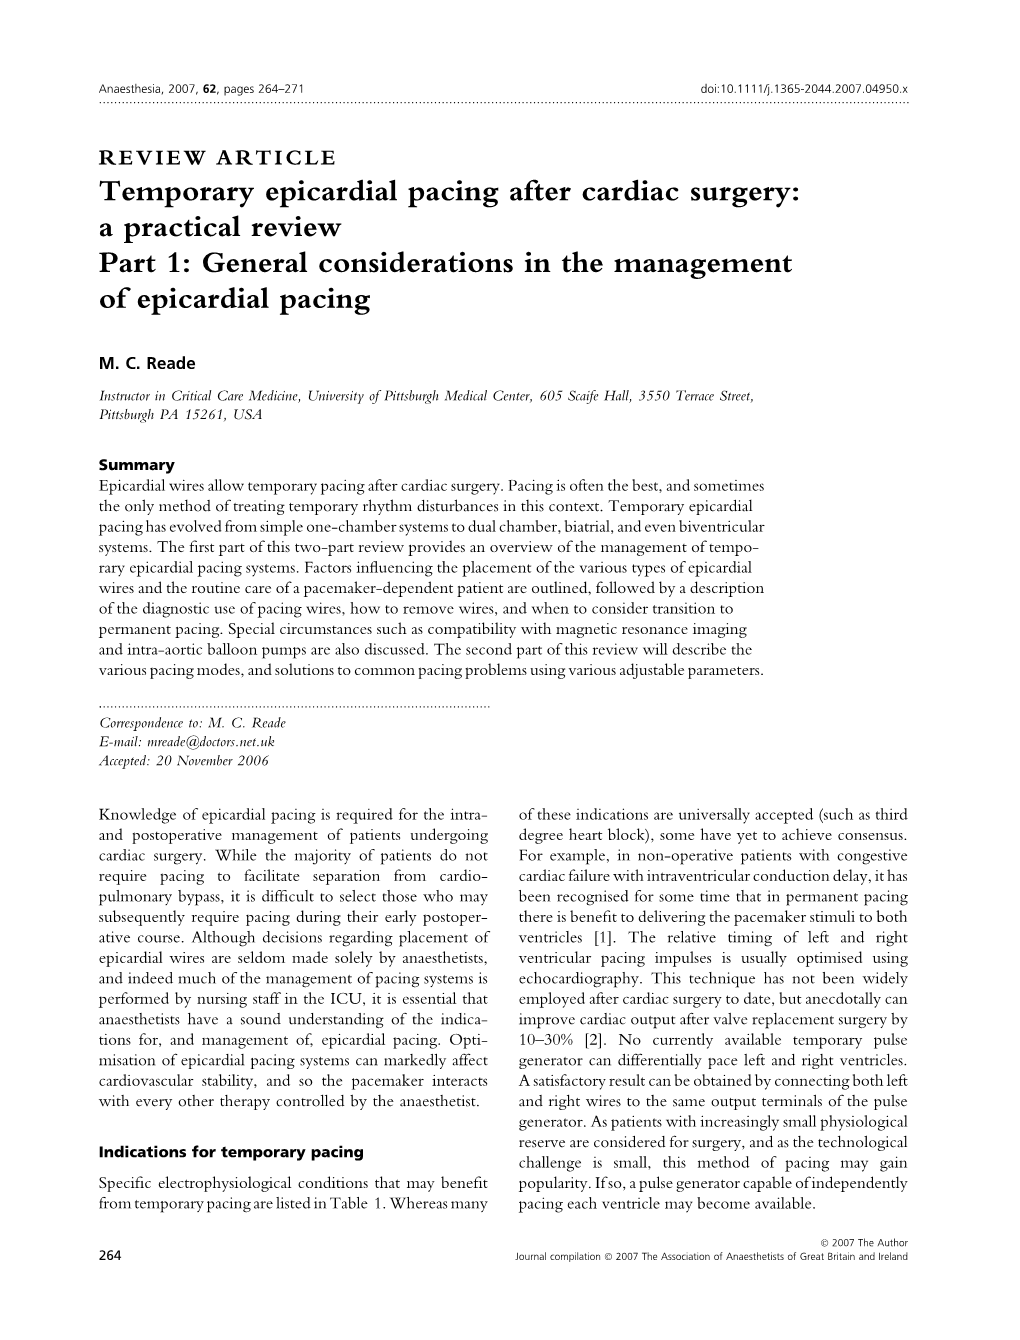 Temporary Epicardial Pacing After Cardiac Surgery: a Practical Review Part 1: General Considerations in the Management of Epicardial Pacing